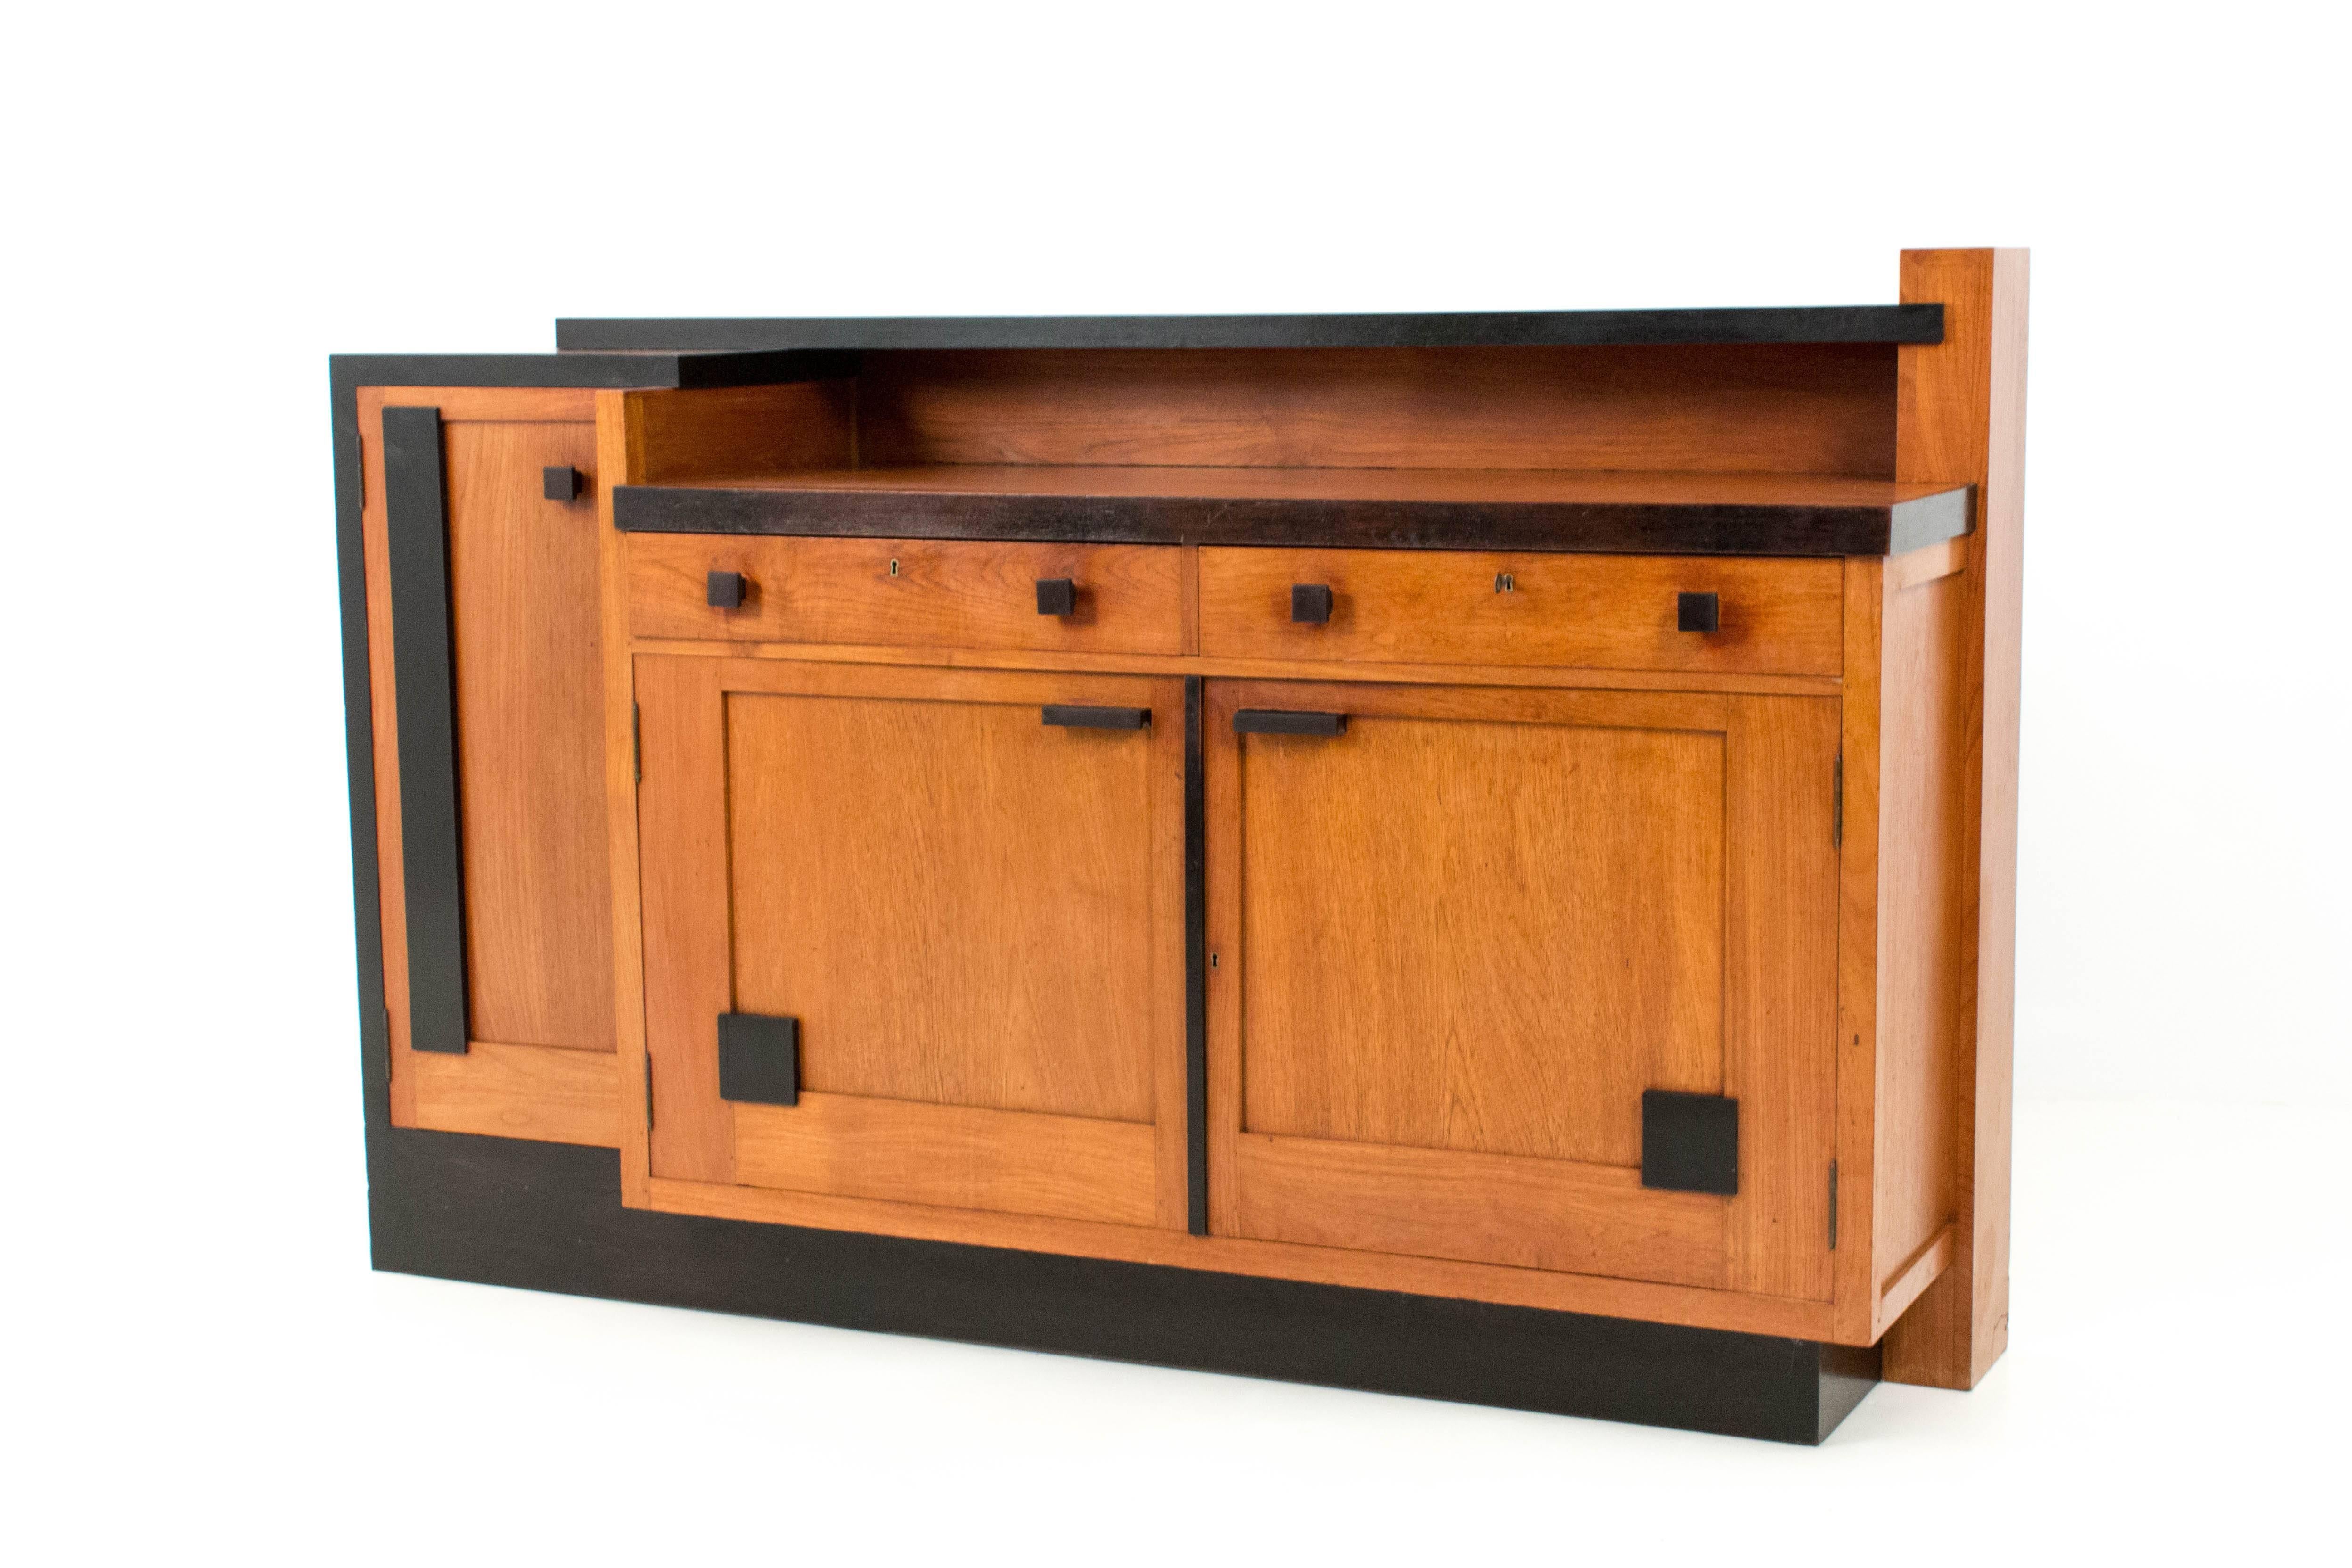 Rare and important sideboard or credenza by Toko v/d Pol Semarang Indonesia.
Solid teak with original ebonized details.
Marked with tag Toko v/d Pol.
In good original condition with minor wear consistent with age and use,
preserving a beautiful